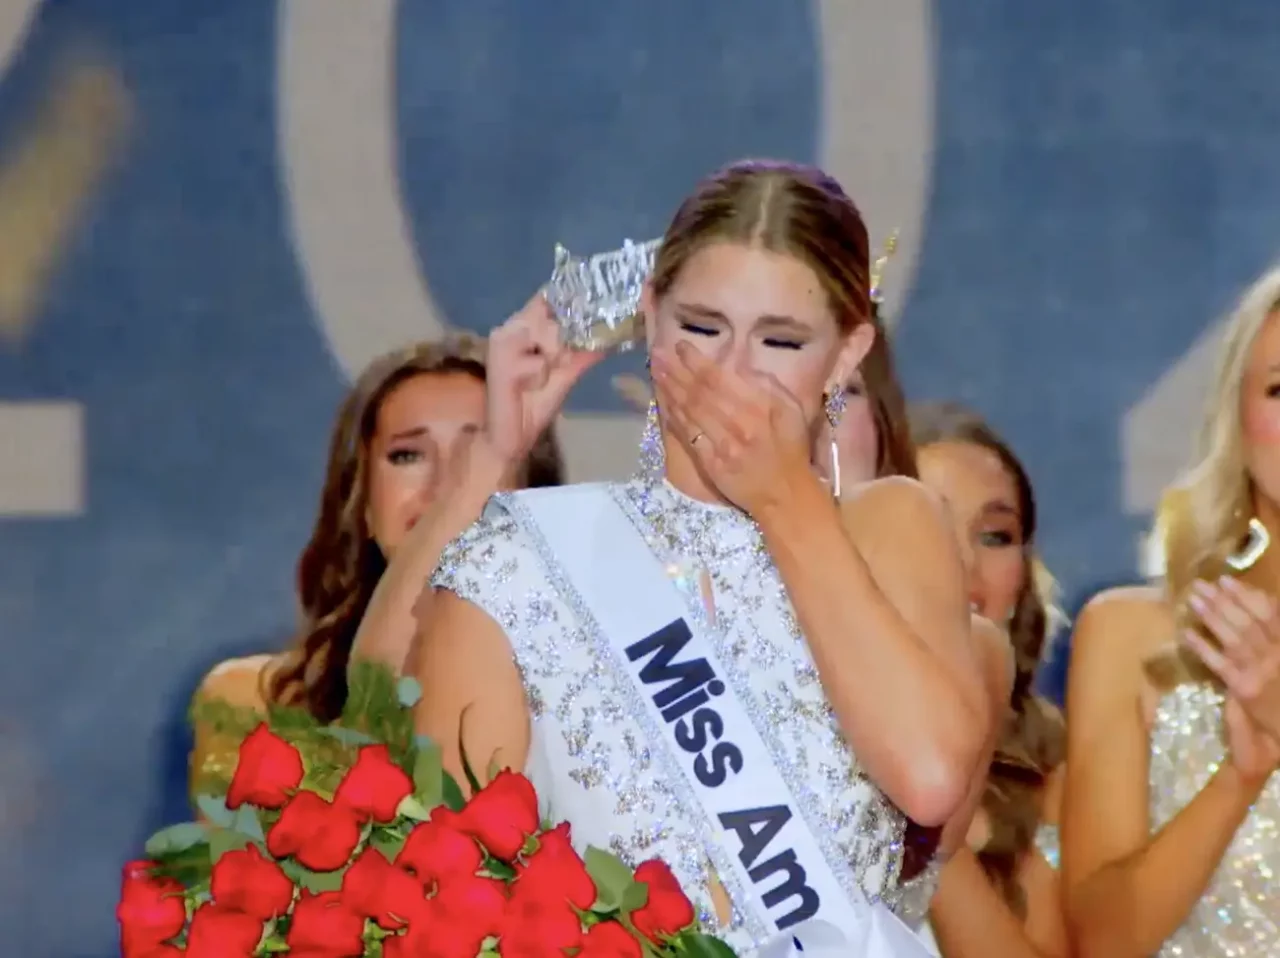 Miss Wisconsin Grace Stanke is the next Miss America 2023